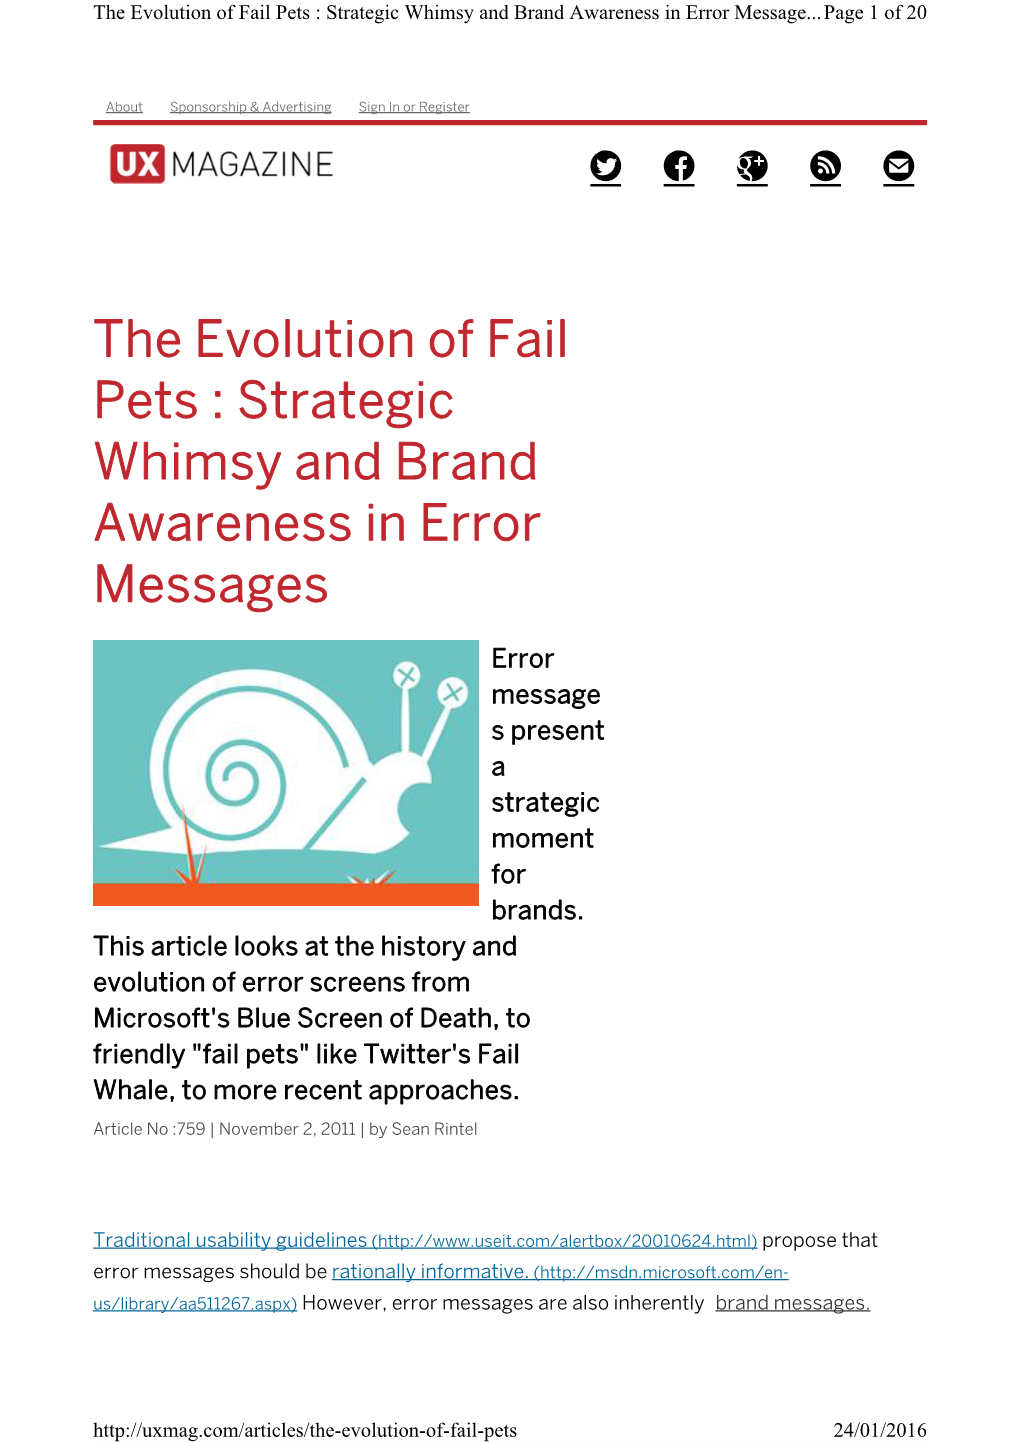 The Evolution of Fail Pets : Strategic Whimsy and Brand Awareness in Error Message...Page 1 of 20